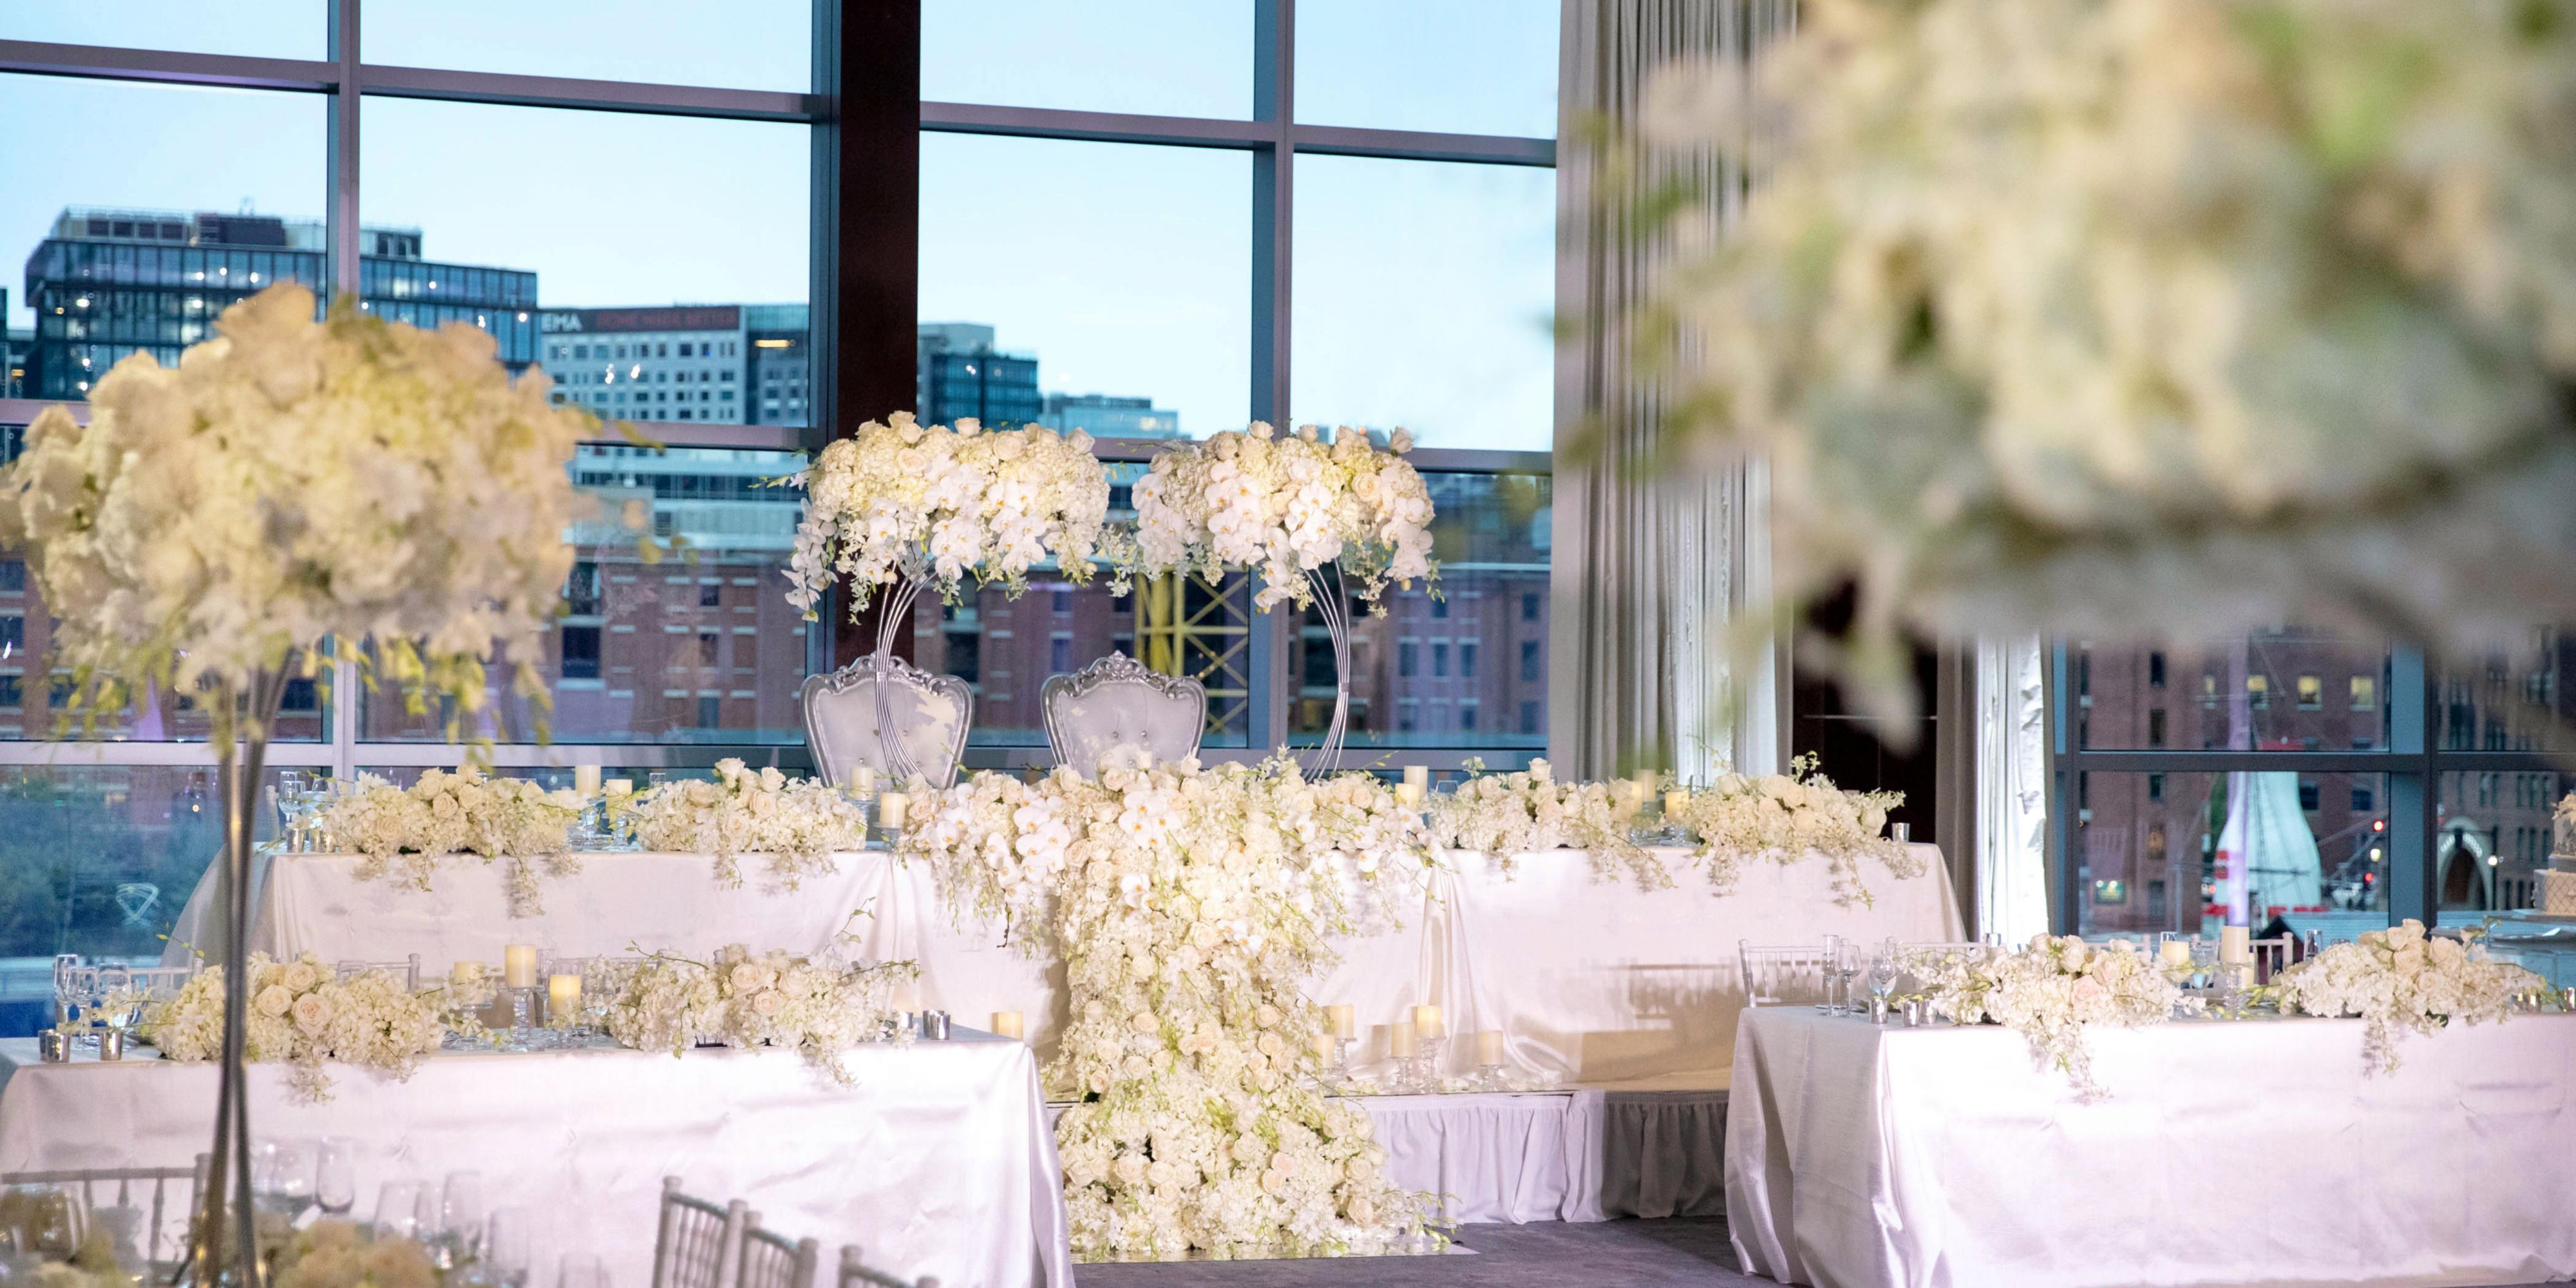 Host your wedding in our luxurious venue with romantic views of the Boston waterfront. Our hotel offers beautiful event spaces, including the Abigail Adams Ballroom and Rose Kennedy Ballroom, with floor-to-ceiling windows overlooking Fort Point Channel and the Seaport District. Our team will assist with the details to make your event unforgettable.